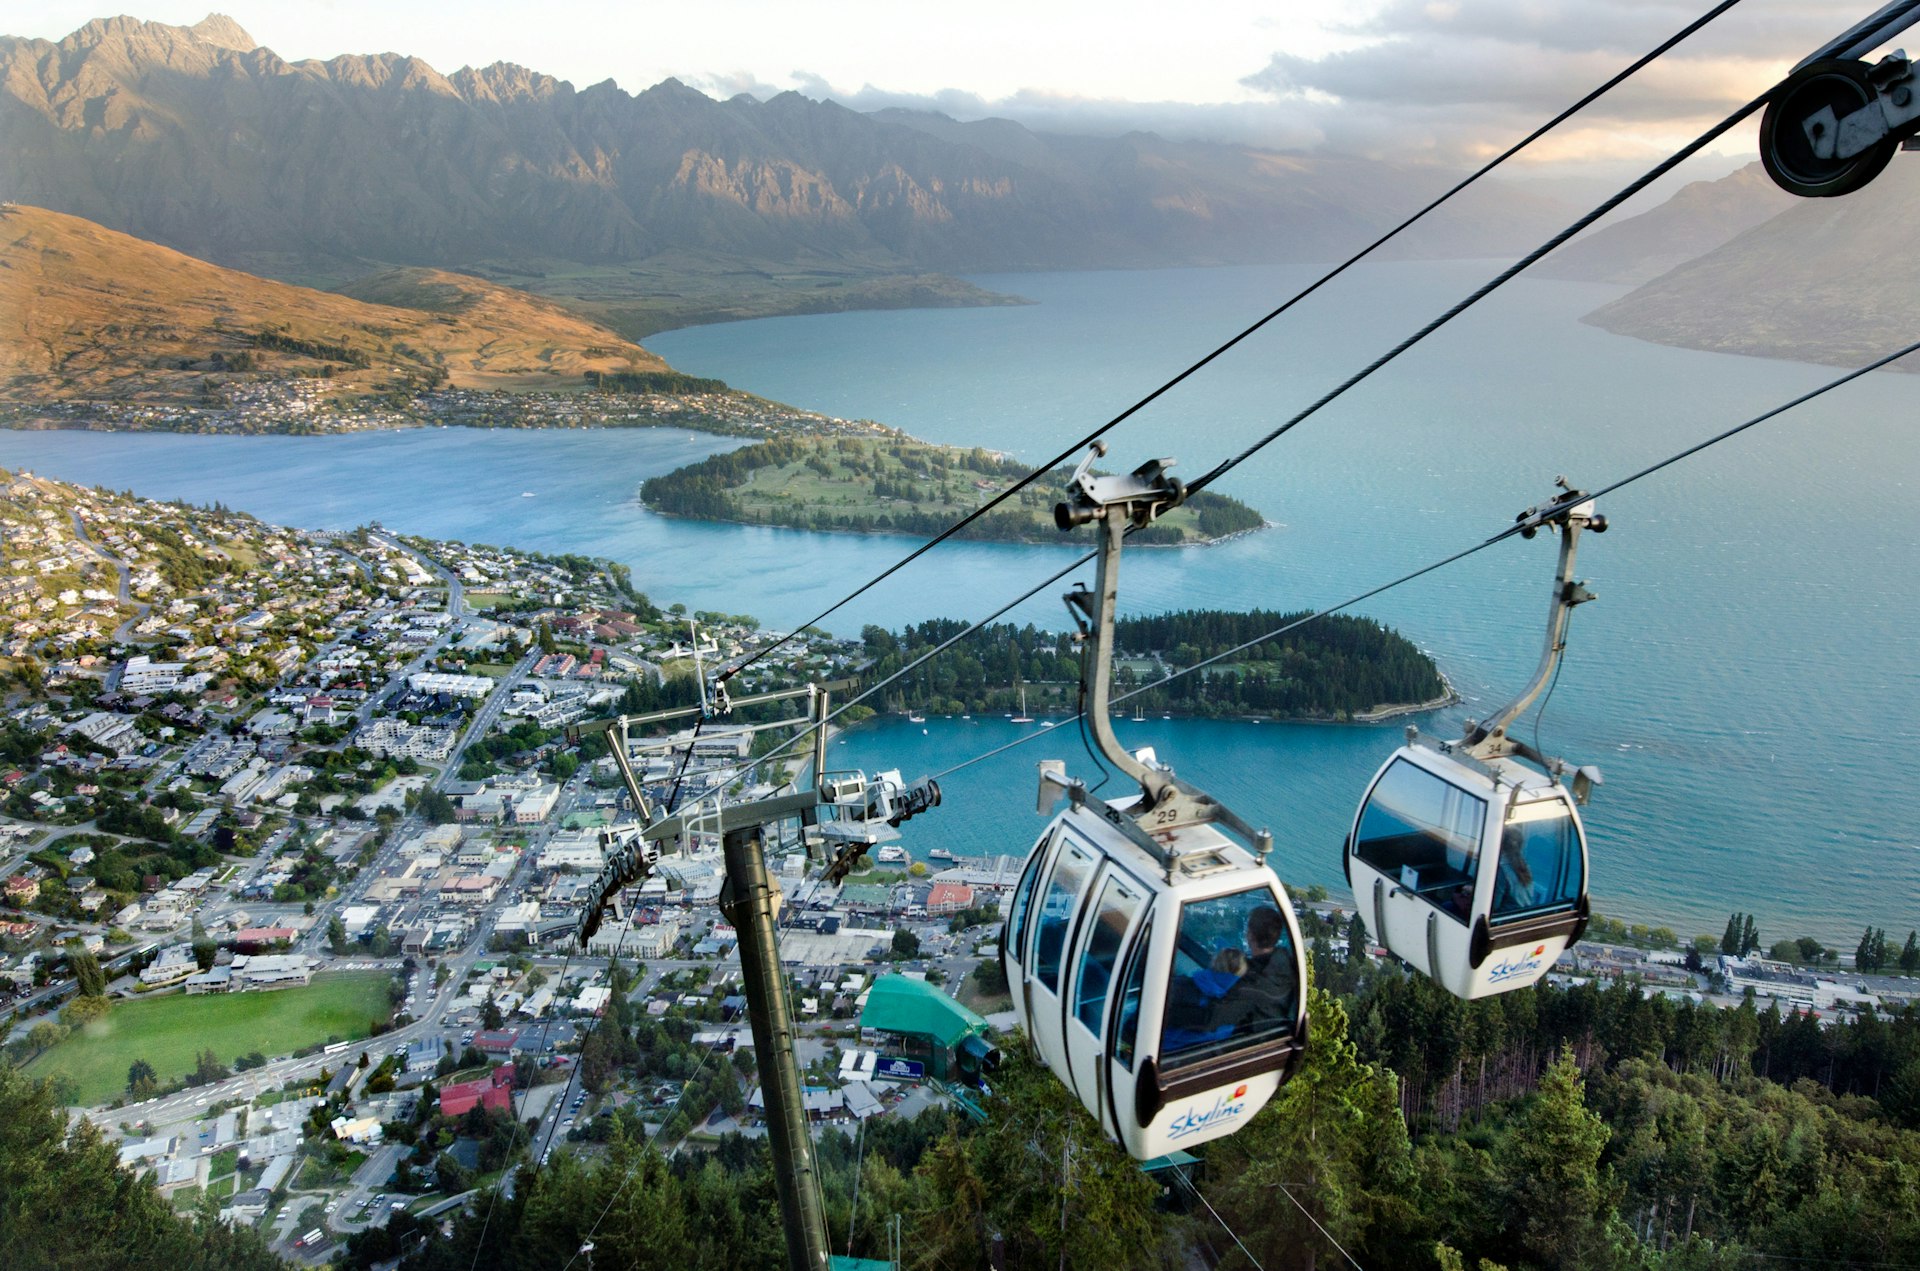 Queenstown Skyline Gondola, the steepest cable car lift in the Southern Hemisphere